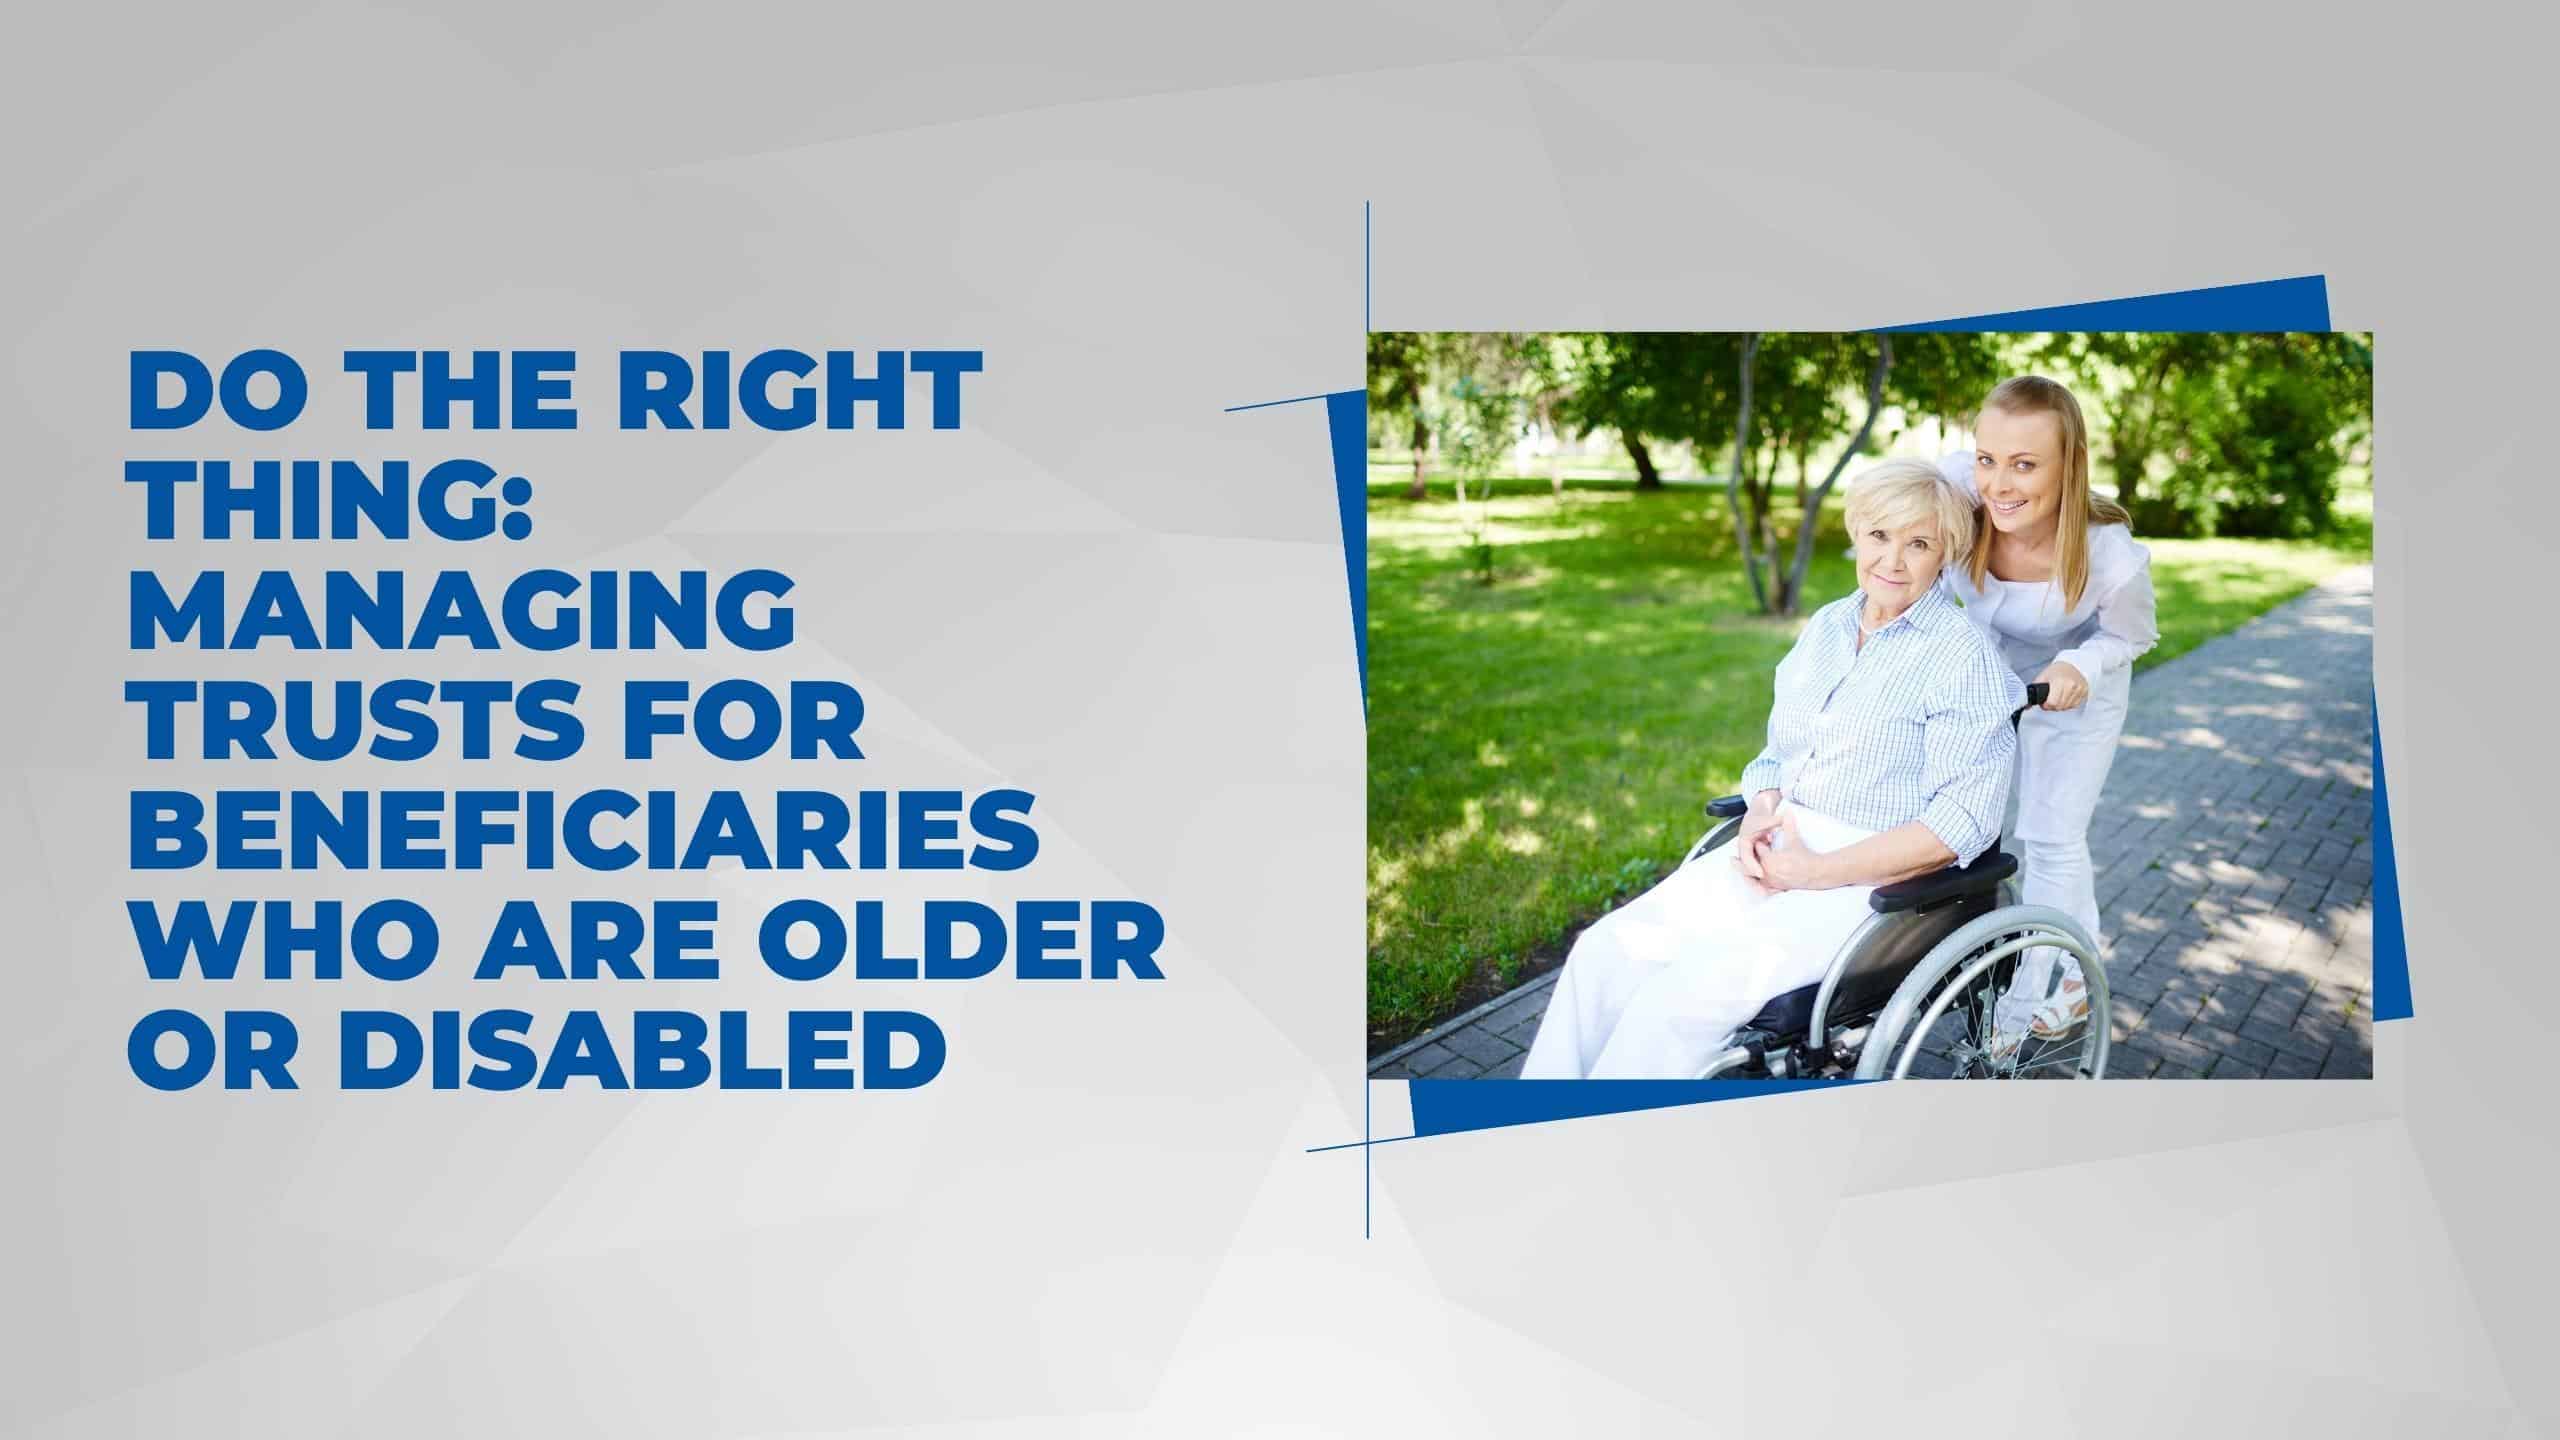 Managing Trusts for Beneficiaries who are Older or Disabled